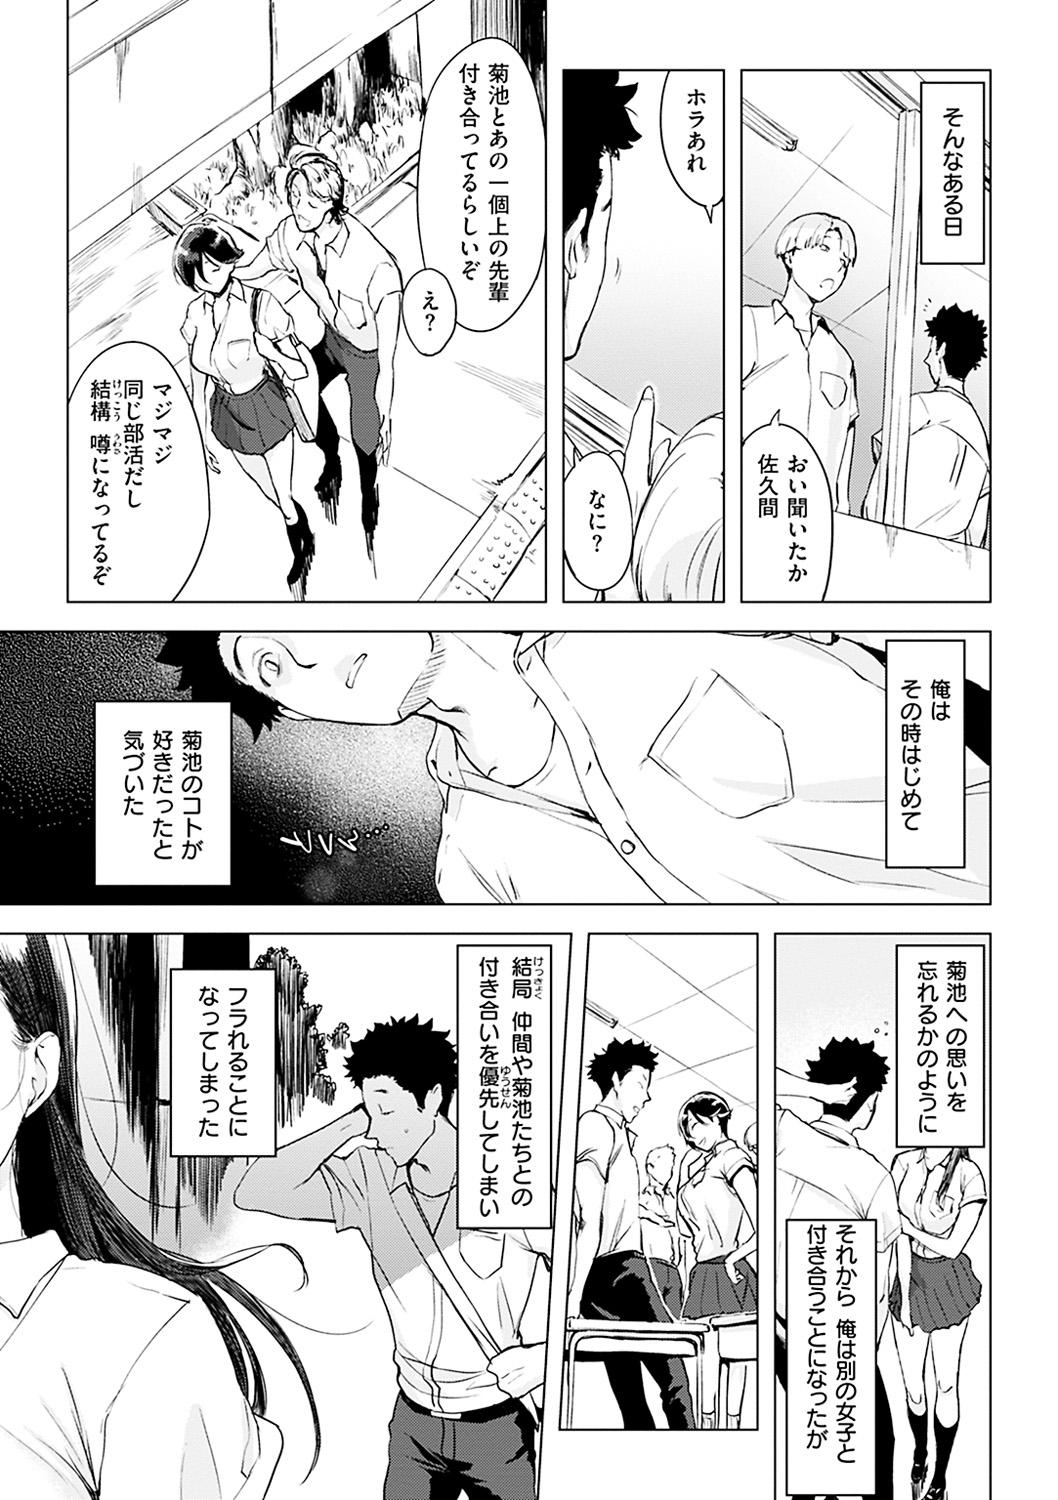 Tiny Tsumi Tsukuri na H - The more immoral sex, the more intensely it burns. Concha - Page 7